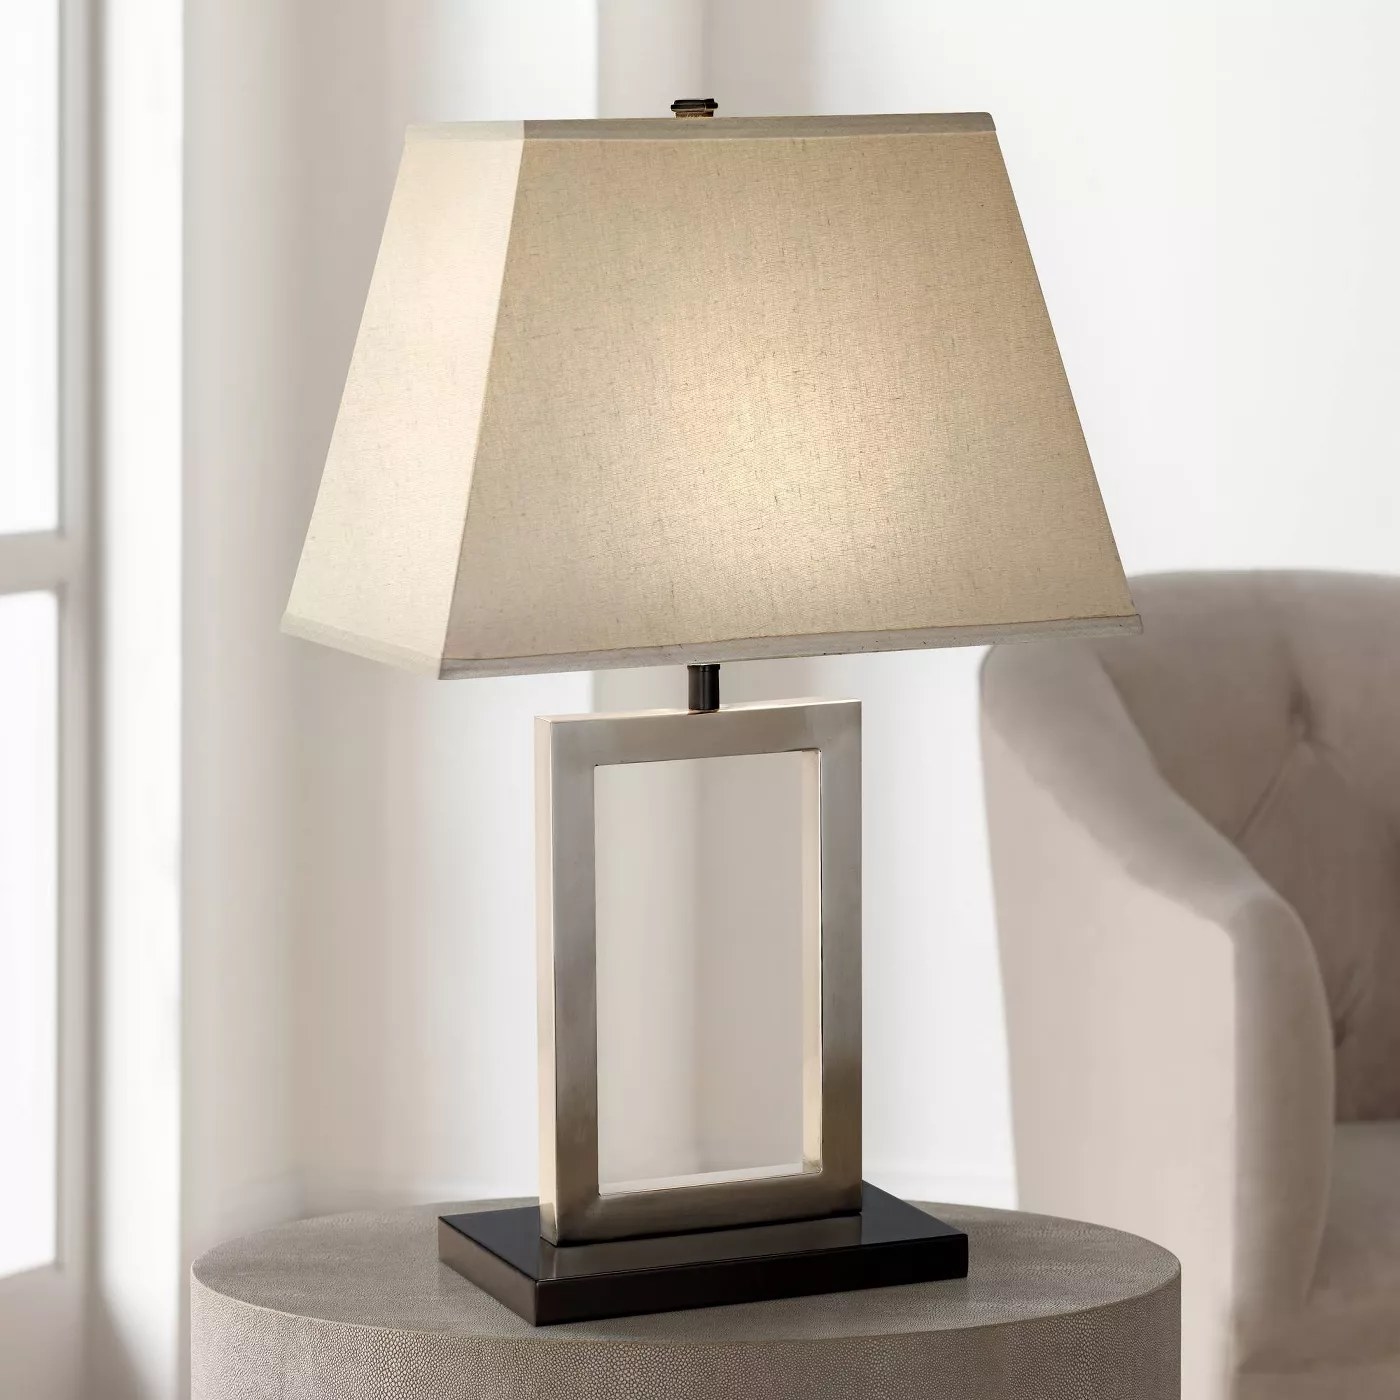 A table lamp with a rectangular base and a linen shade